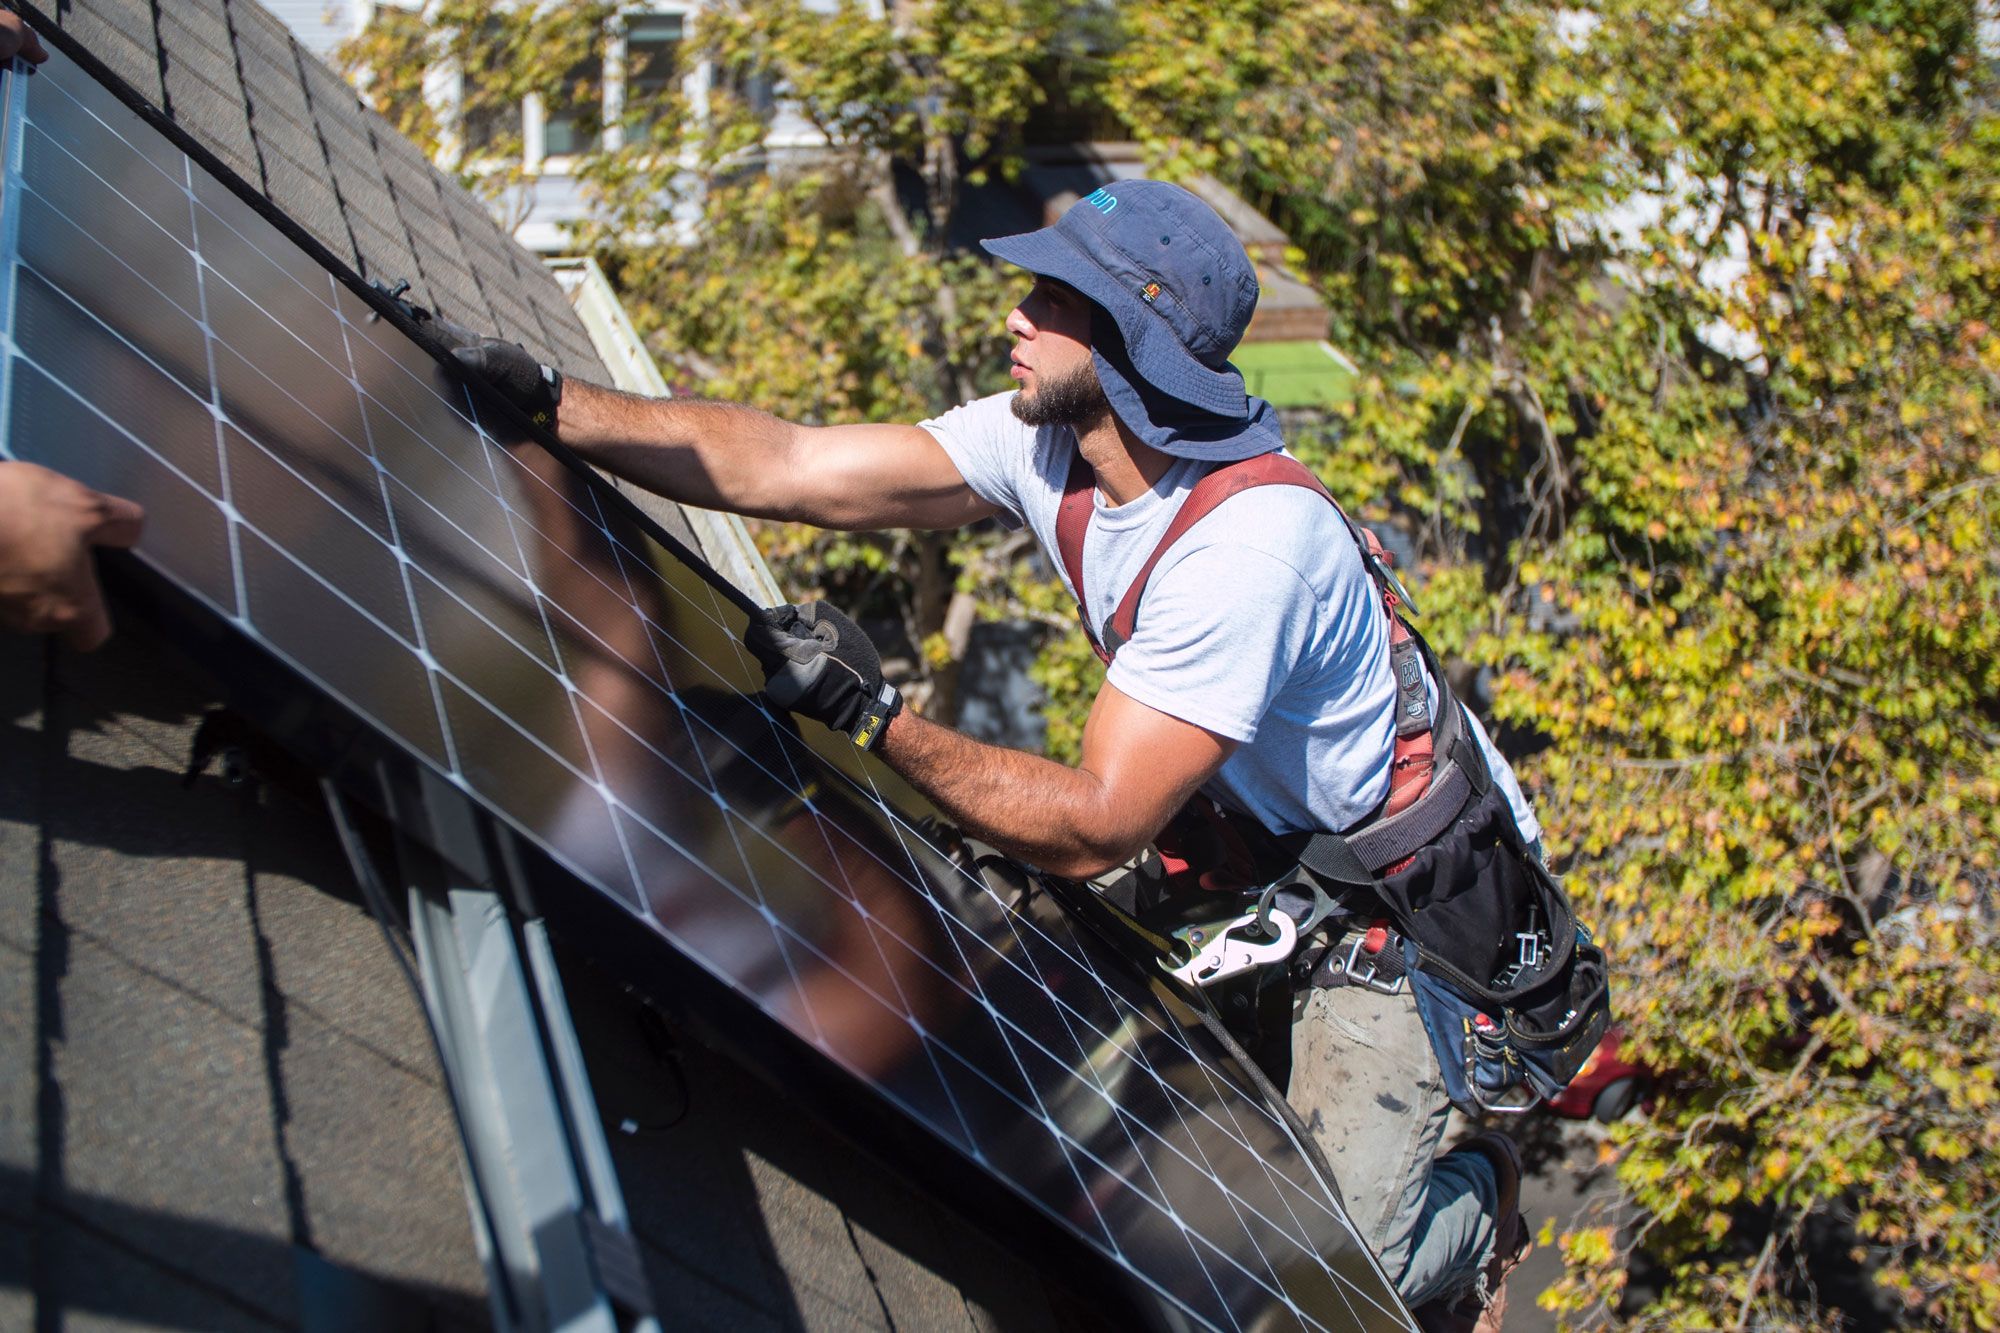 This ‘Tiger cub’ hedge fund is betting huge on a photo voltaic inventory. This is possible why